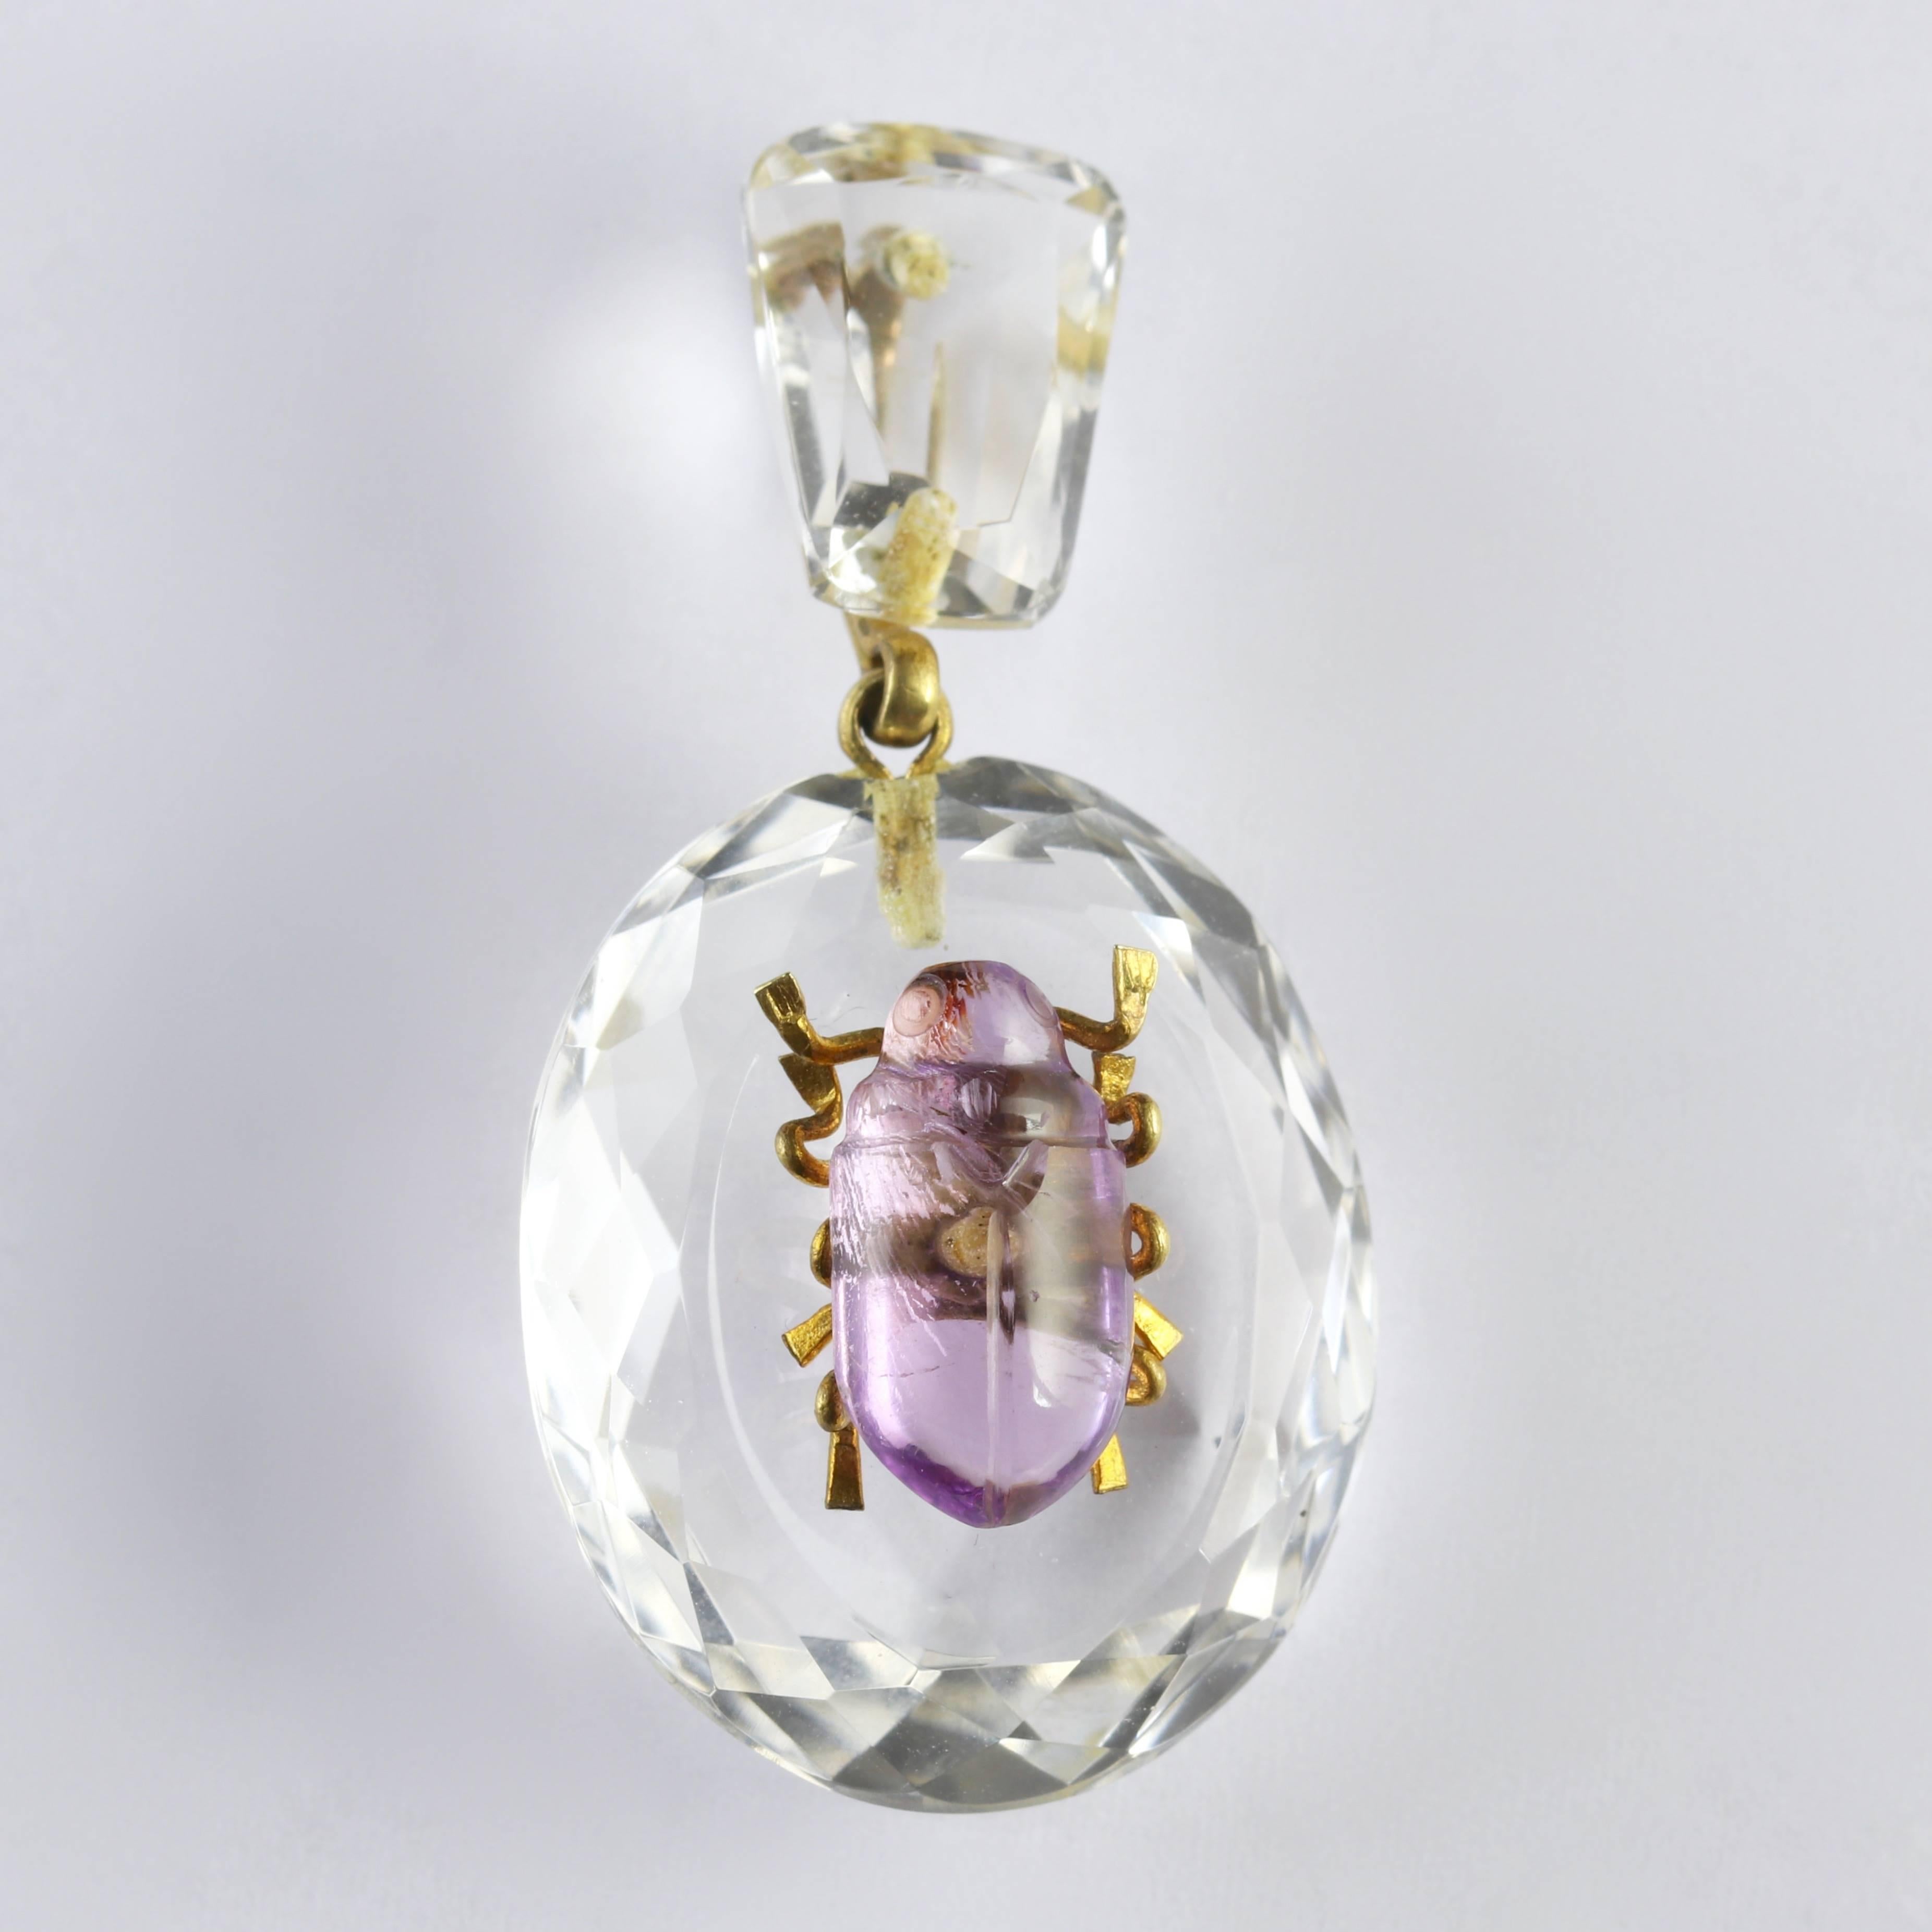 This genuine Antique Victorian Rock Crystal pendant is Circa 1880.

Set with a Cabochon Amethyst bug in the centre with Gold legs and loop.

Amethyst has been highly esteemed throughout the ages for its stunning beauty and legendary powers to